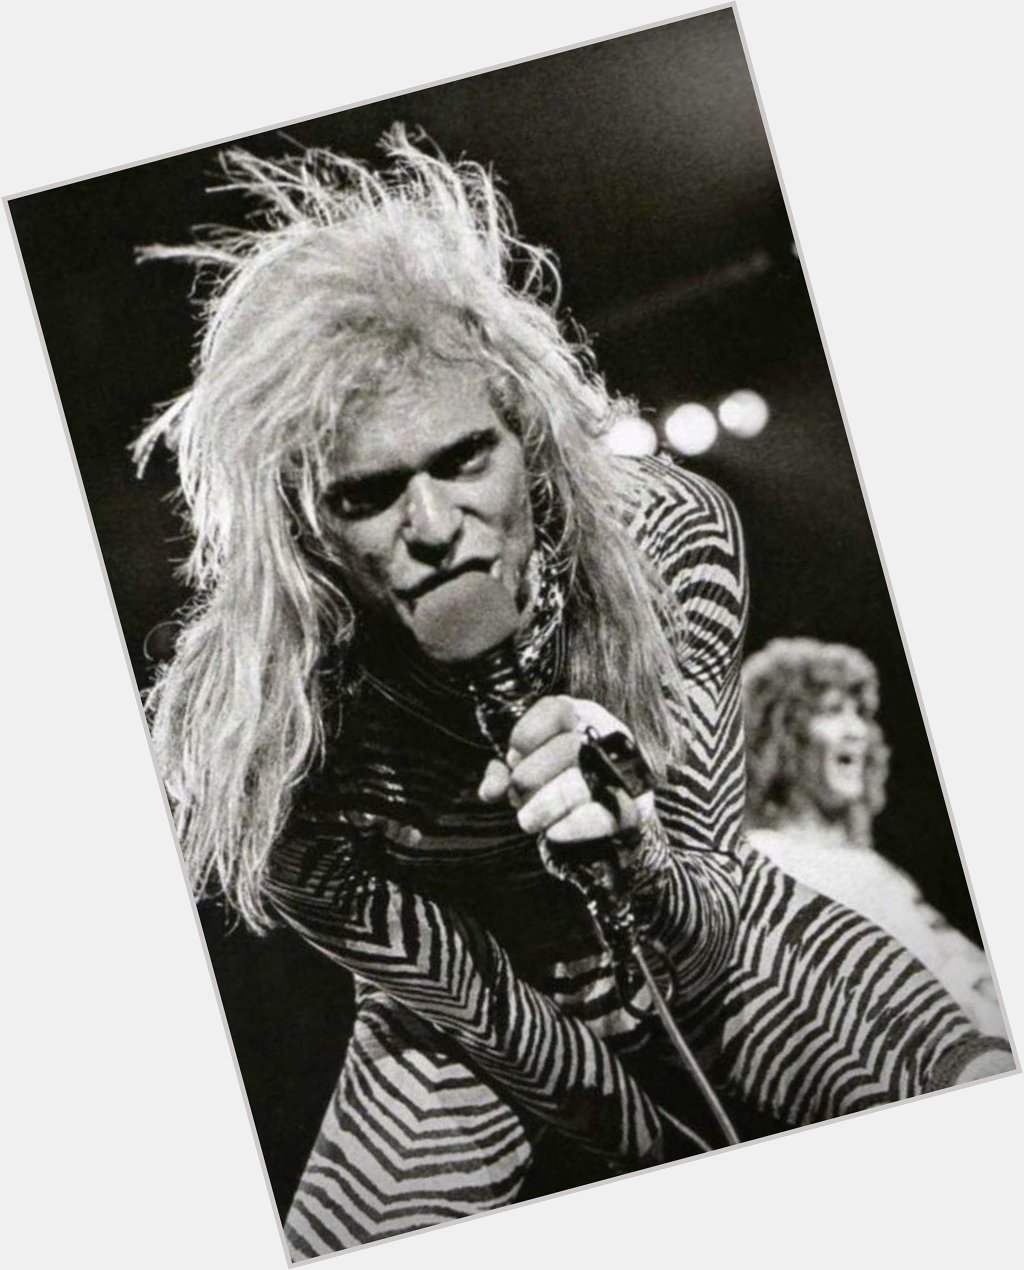 Happy Birthday DAVID LEE ROTH! The only one to show the rest how it\s done. 